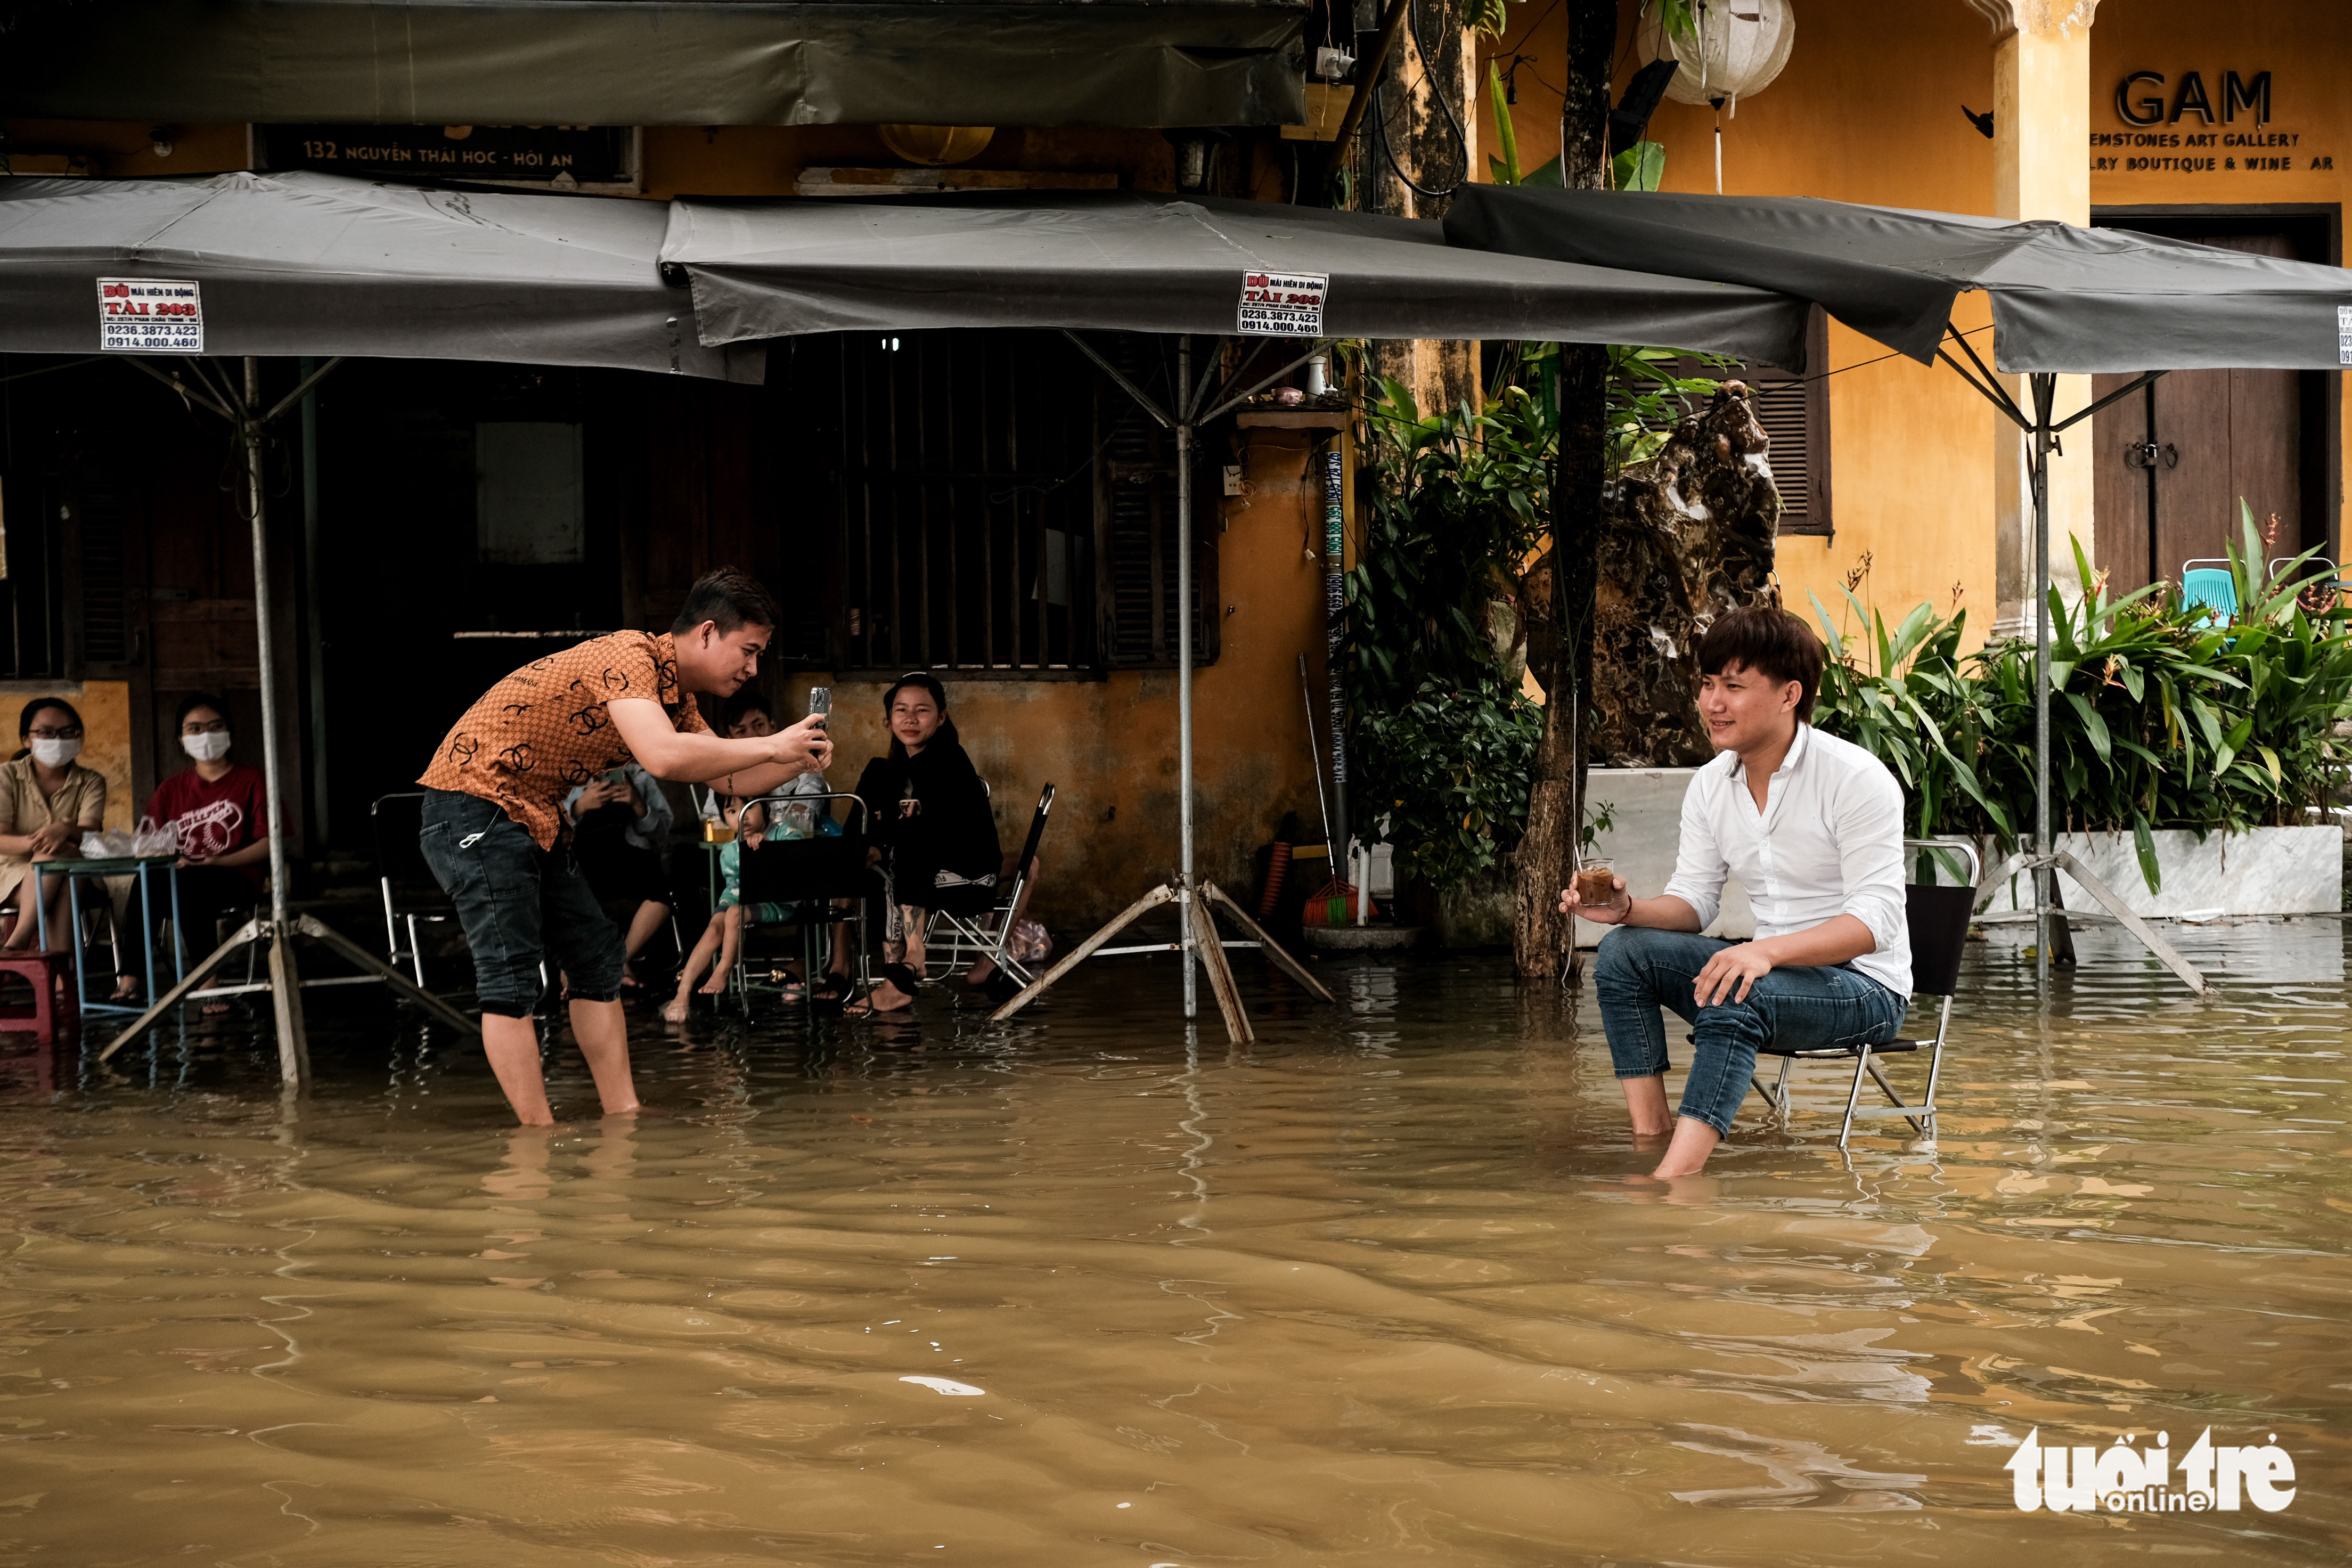 Hoi An Ancient Town's newest craze: Enjoying coffee amid floodwaters